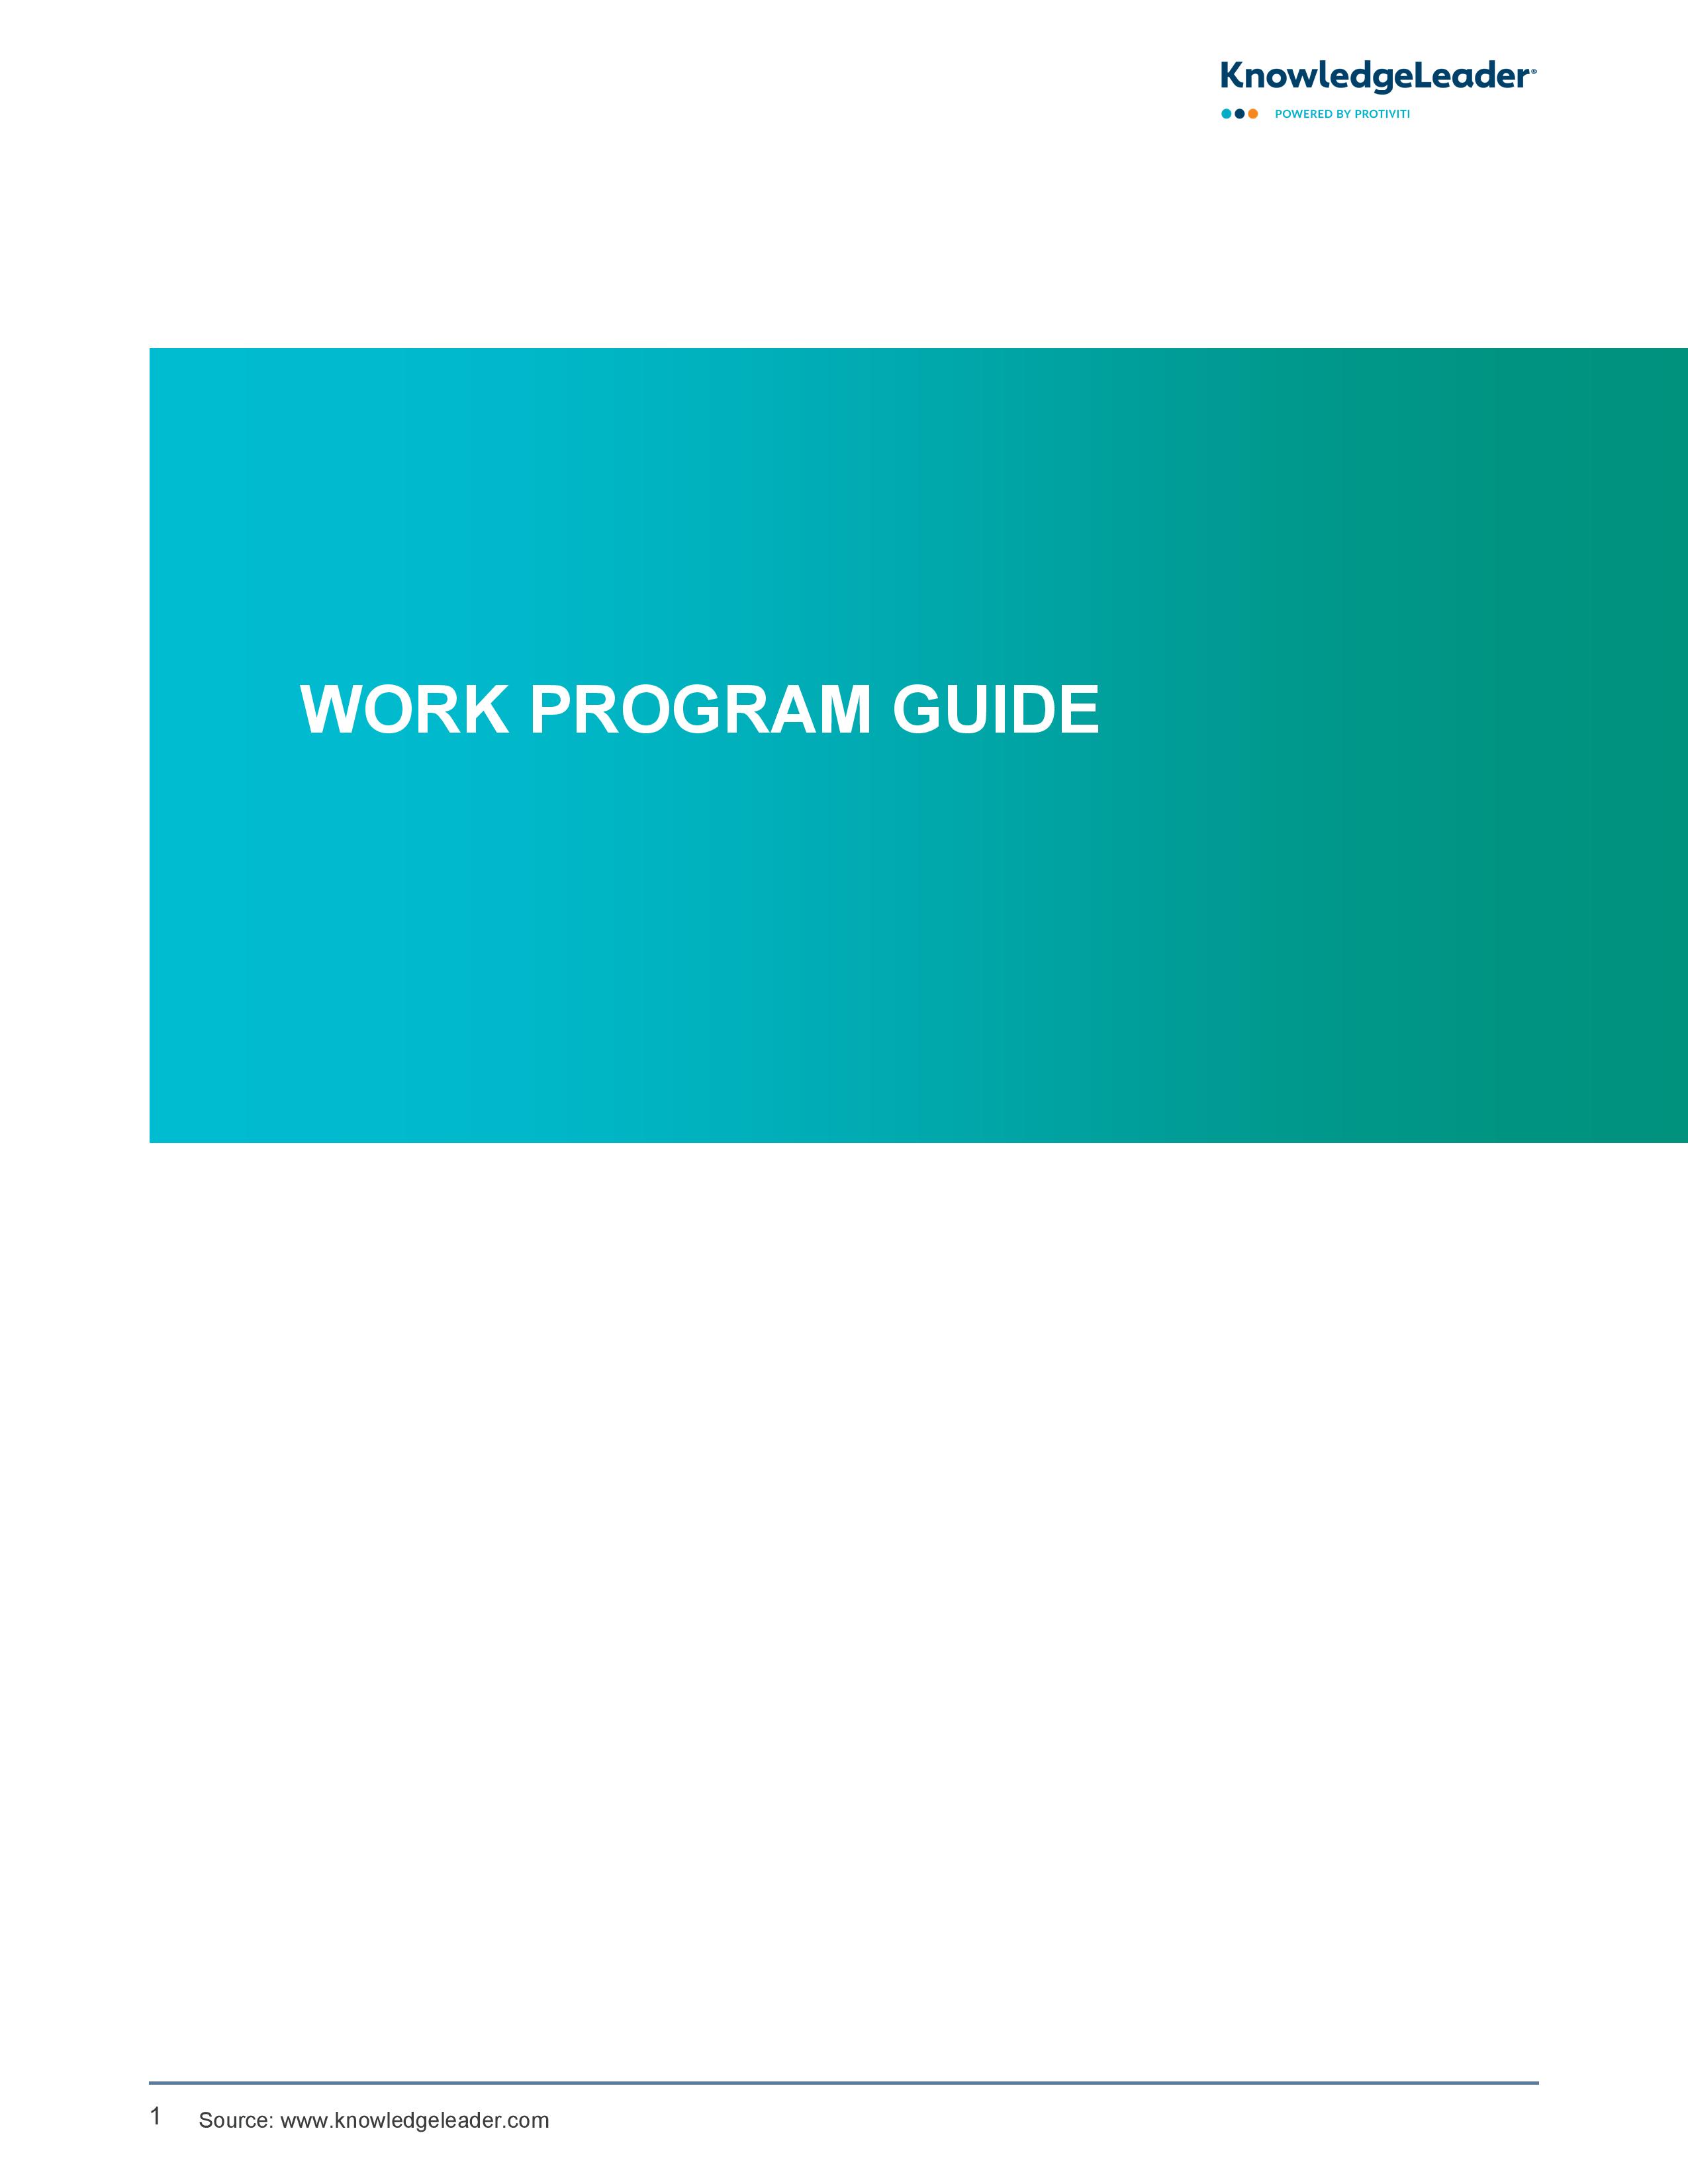 screenshot of the first page of Work Program Guide